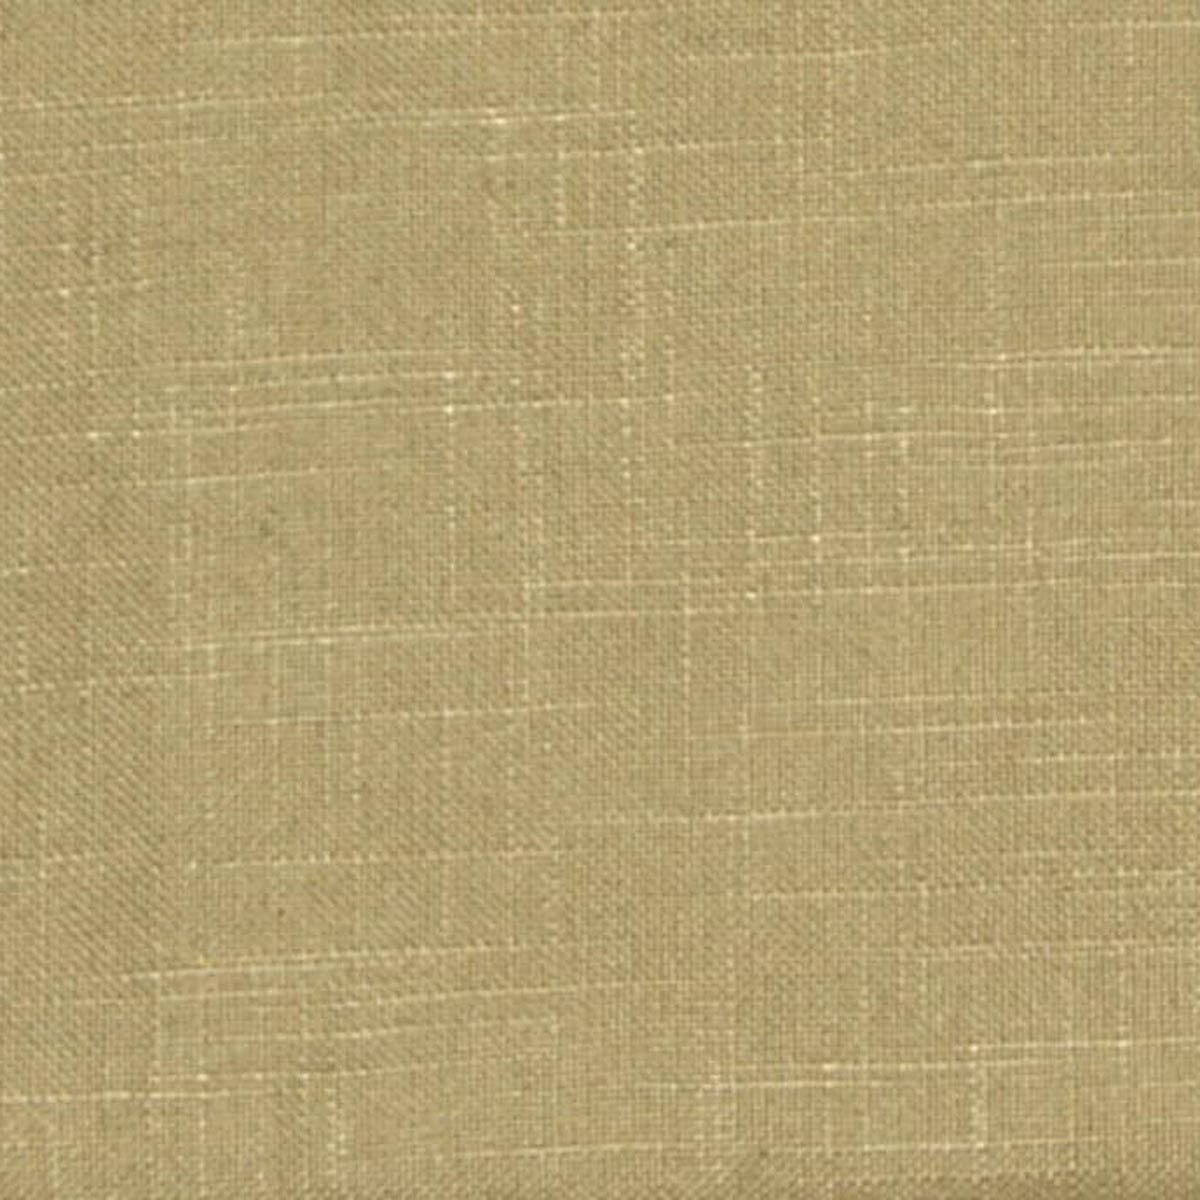 Ari fabric in grass color - pattern number LM 00081009 - by Scalamandre in the Old World Weavers collection